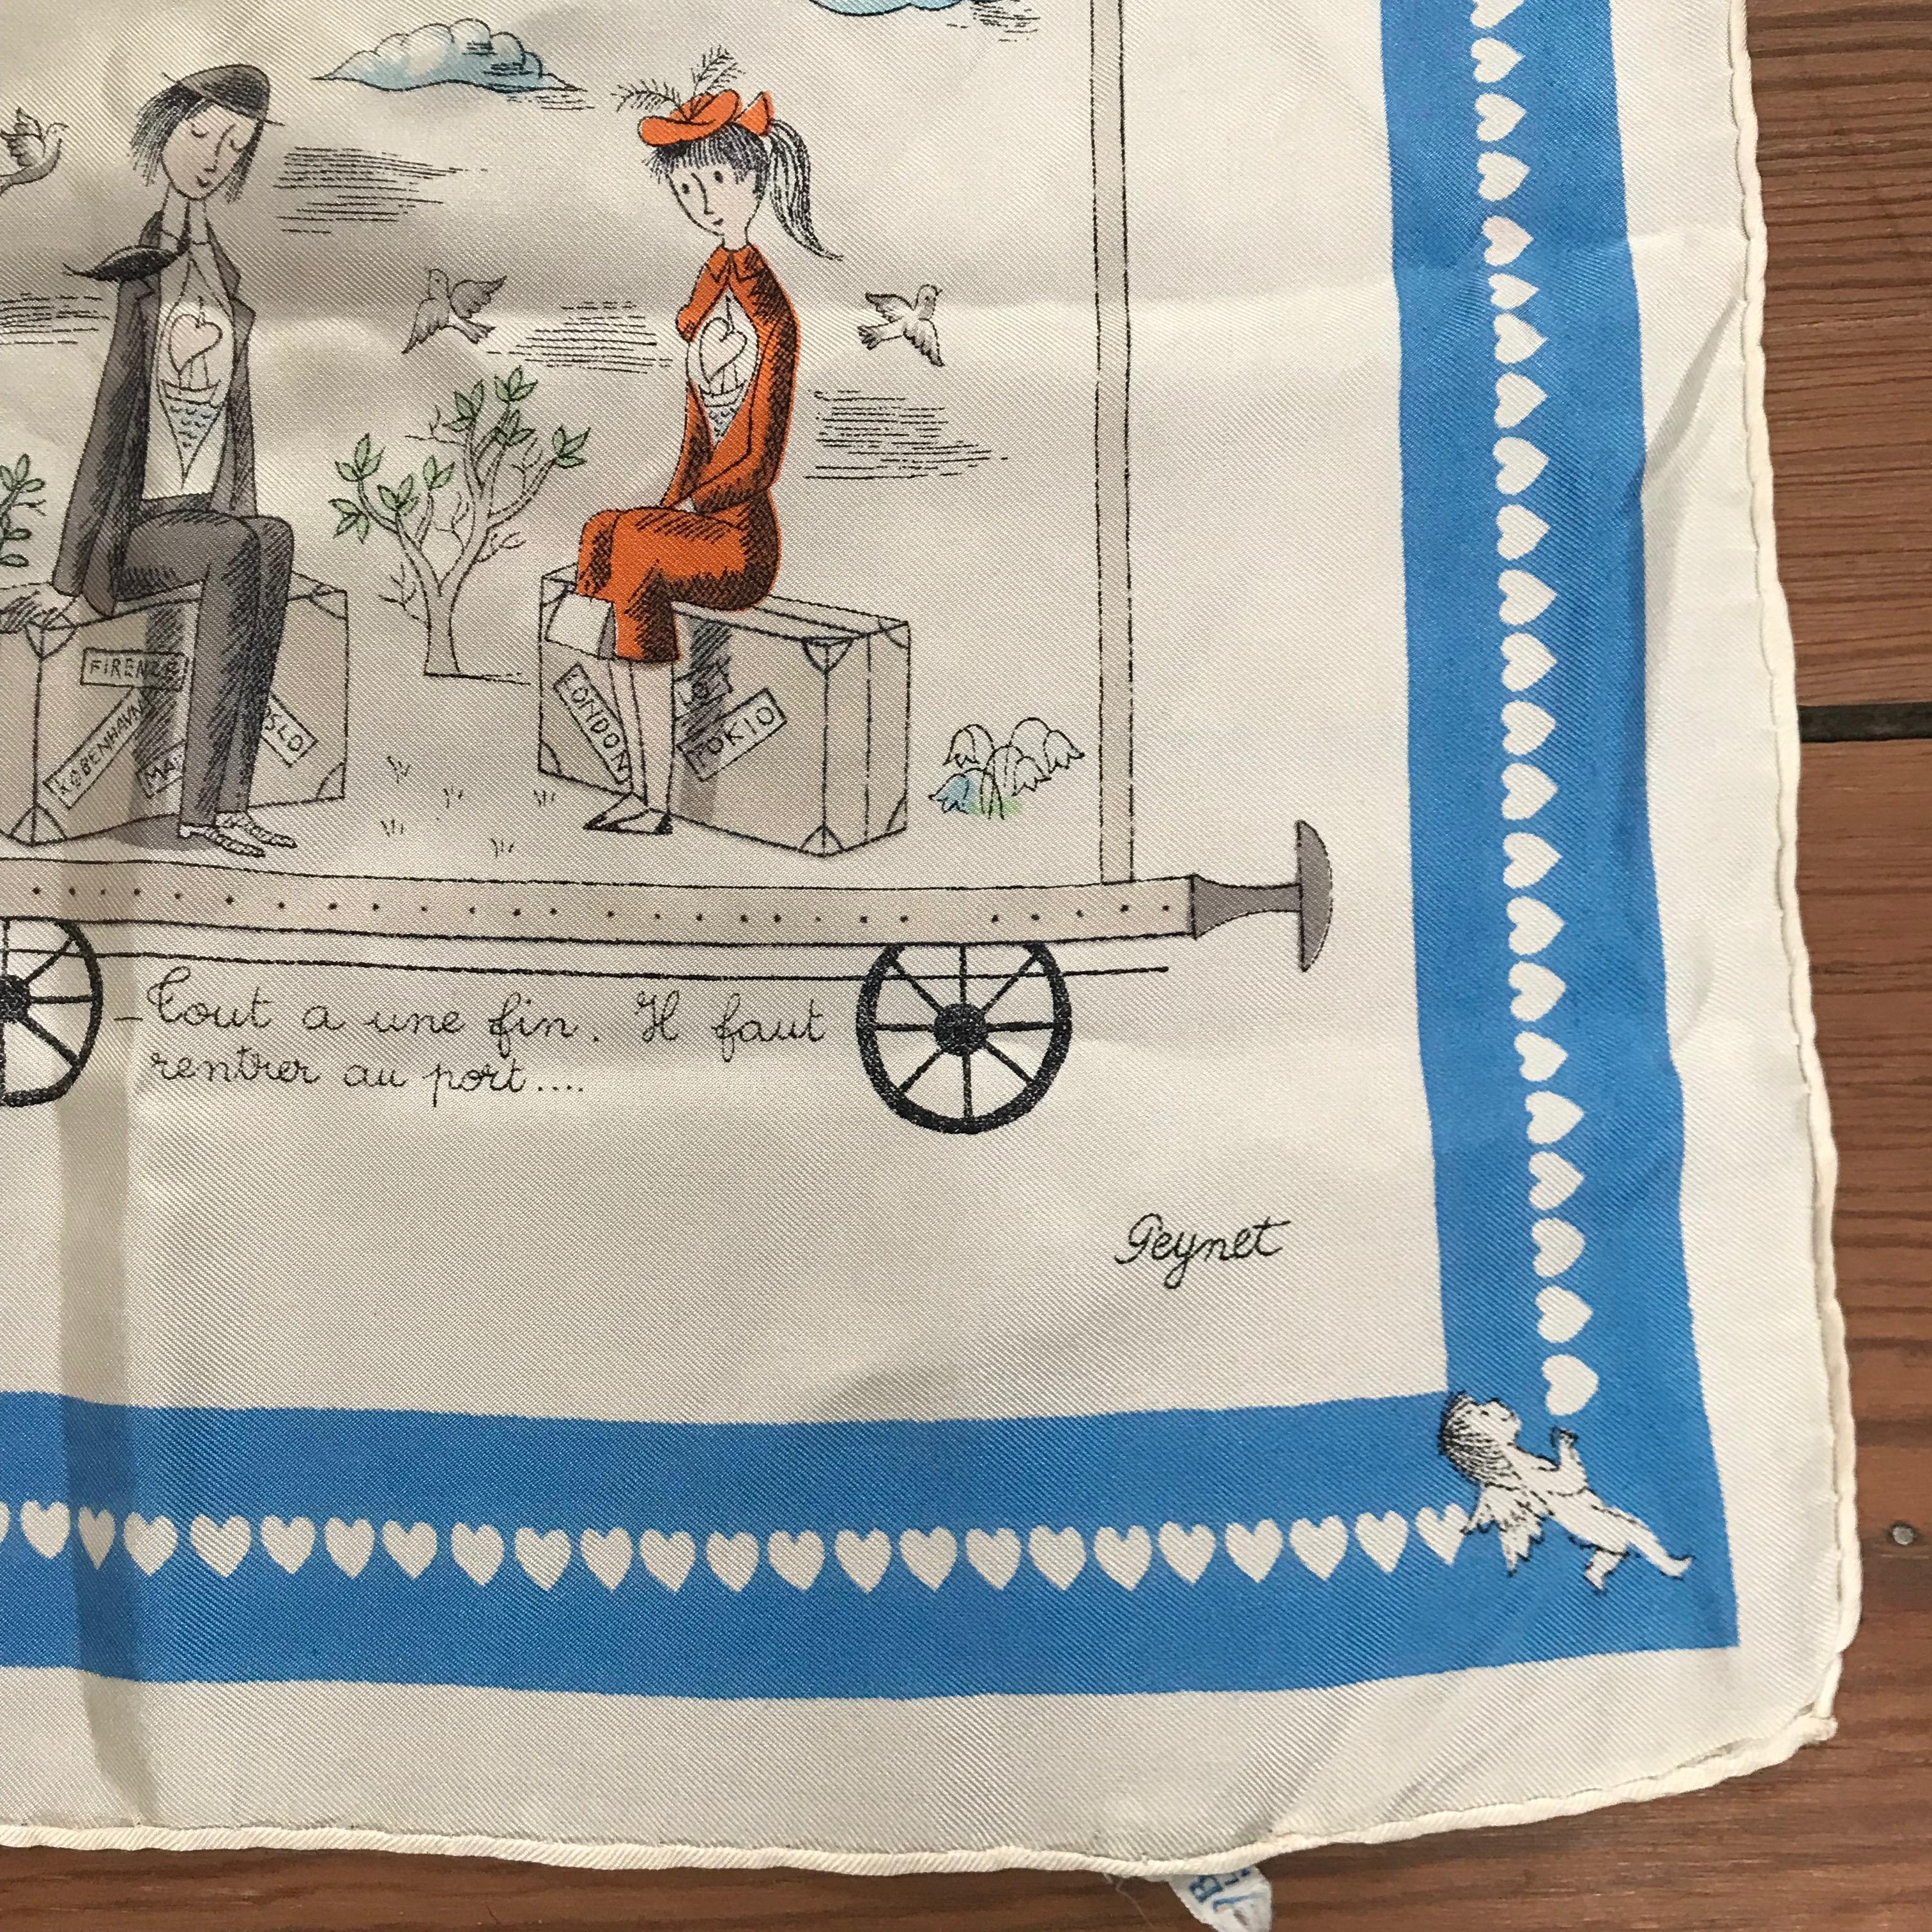 Vintage 1940's SILK SCARF ~FRENCH~PARIS~PEYNET LOVERS
This lovely blue and white silk scarf was made in Lyon ,France by Baccaret . Featuring the ever popular Peynet Lovers. It is titled: LE BEAU VOYAGE des AMOUREUX de PEYNET, or loosely translated -